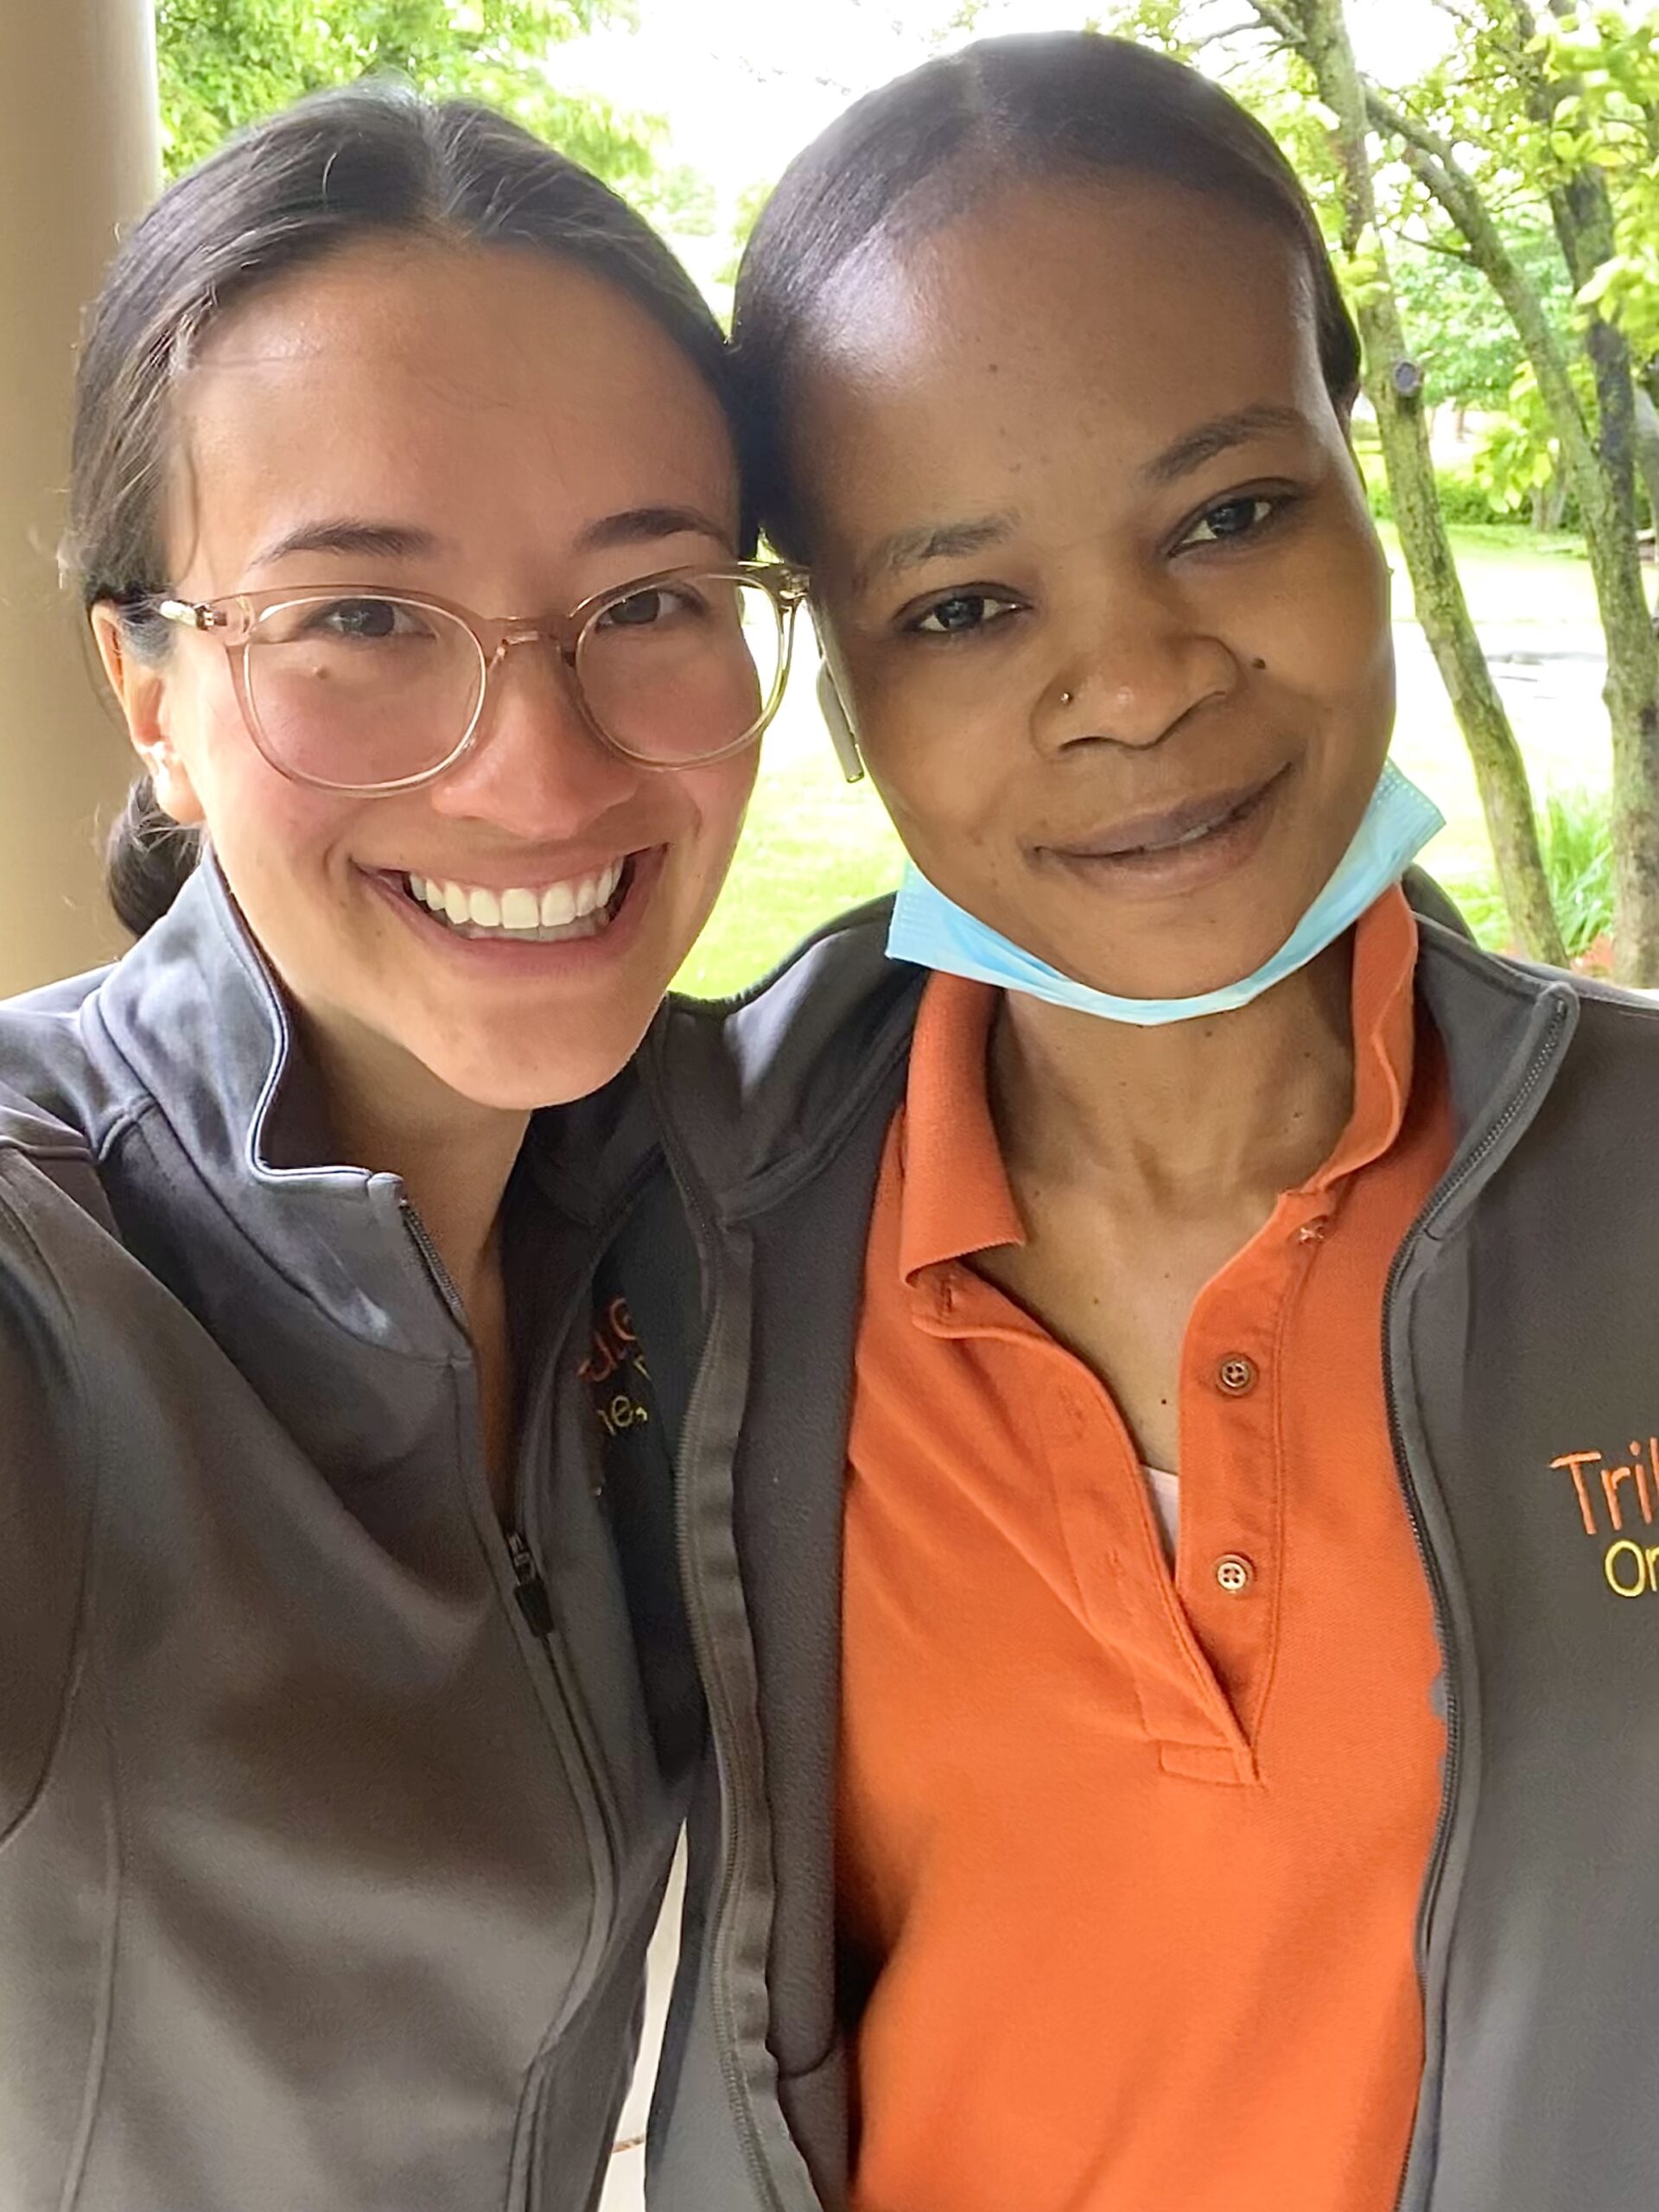 Tribute Caregivers Oneikha and Julianne smiling together